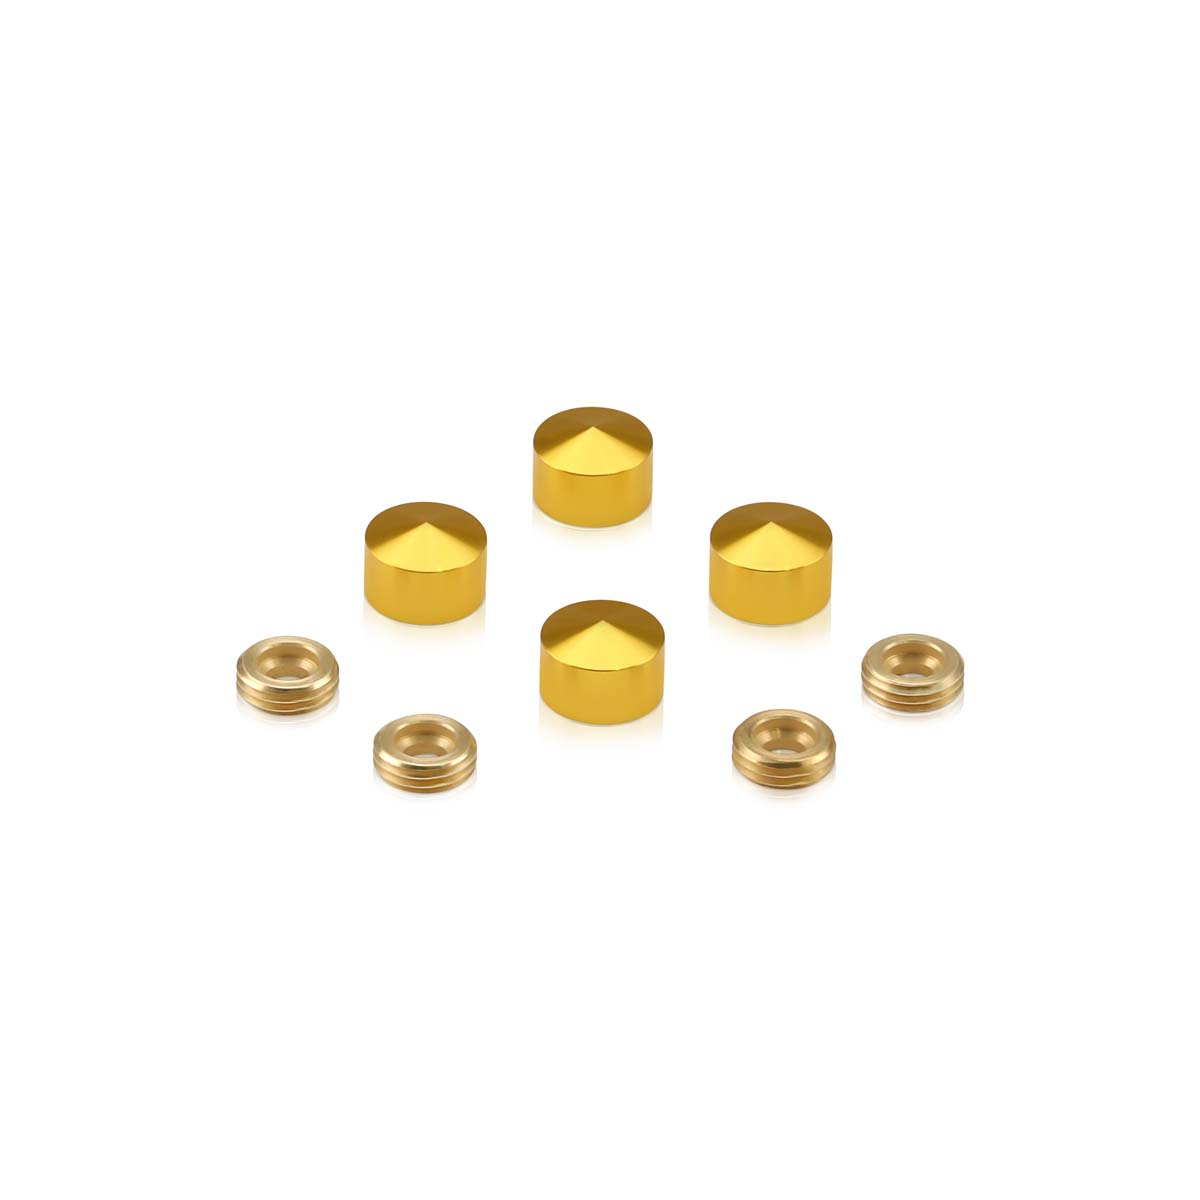 Set of 4 Conical Screw Cover, Diameter: 1/2'', Aluminum Gold Anodized Finish (Indoor or Outdoor Use)